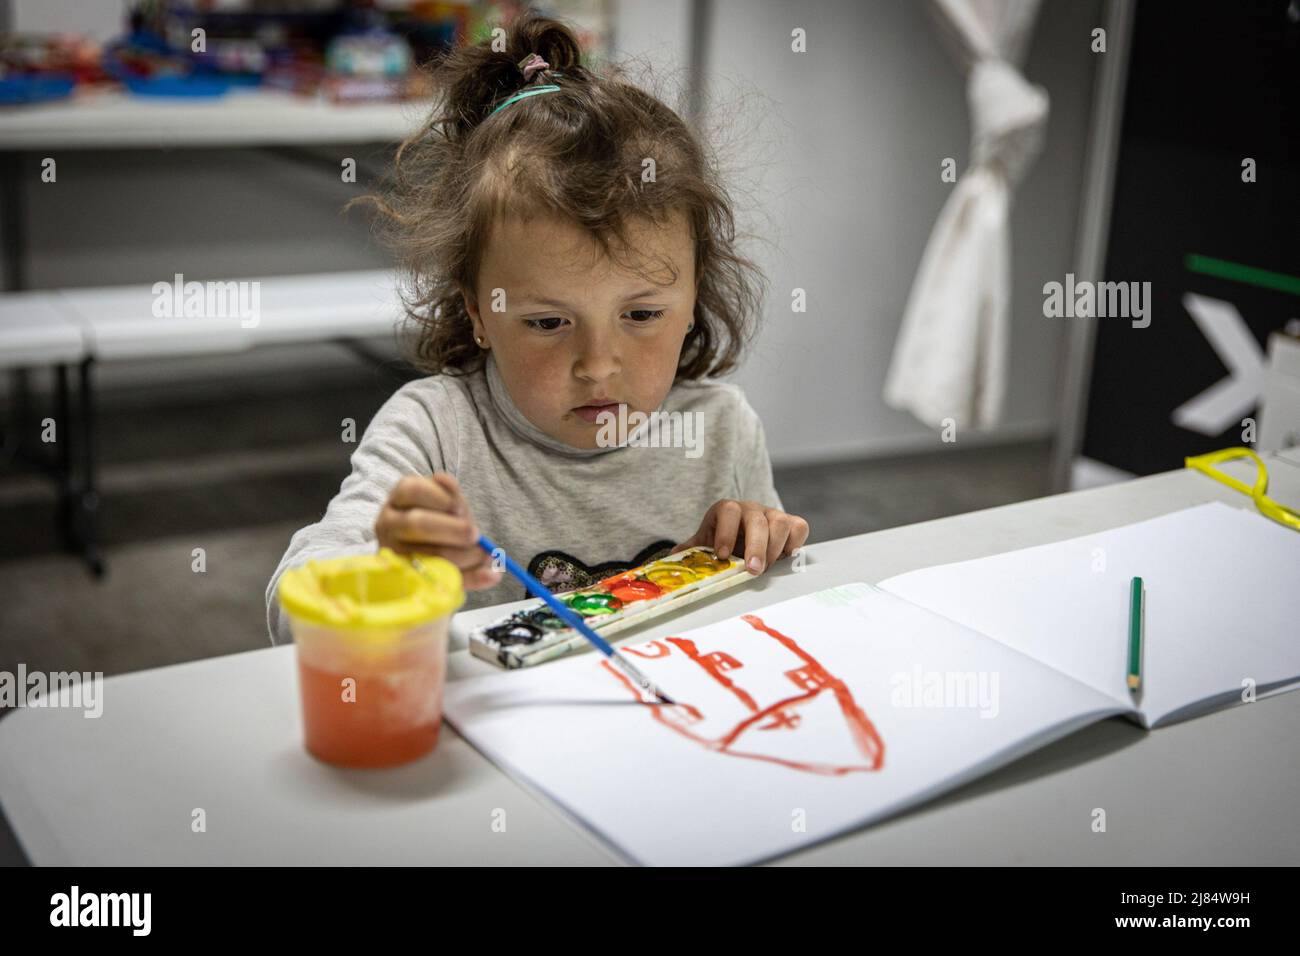 Zaporizhzhia, Ukraine. 11th May, 2022. Sophia seen drawing a house at an underground refugee shelter. Temporary refugee shelters have been set up in Zaporizhia, as the city has been constantly receiving refugees fleeing from Russian controlled territories in the country's east and south. According to the United Nations, more than 11 million people are believed to have fled their homes in Ukraine since the conflict began, with 7.7 million people displaced inside their homeland. (Photo by Alex Chan Tsz Yuk/SOPA Images/Sipa USA) Credit: Sipa USA/Alamy Live News Stock Photo